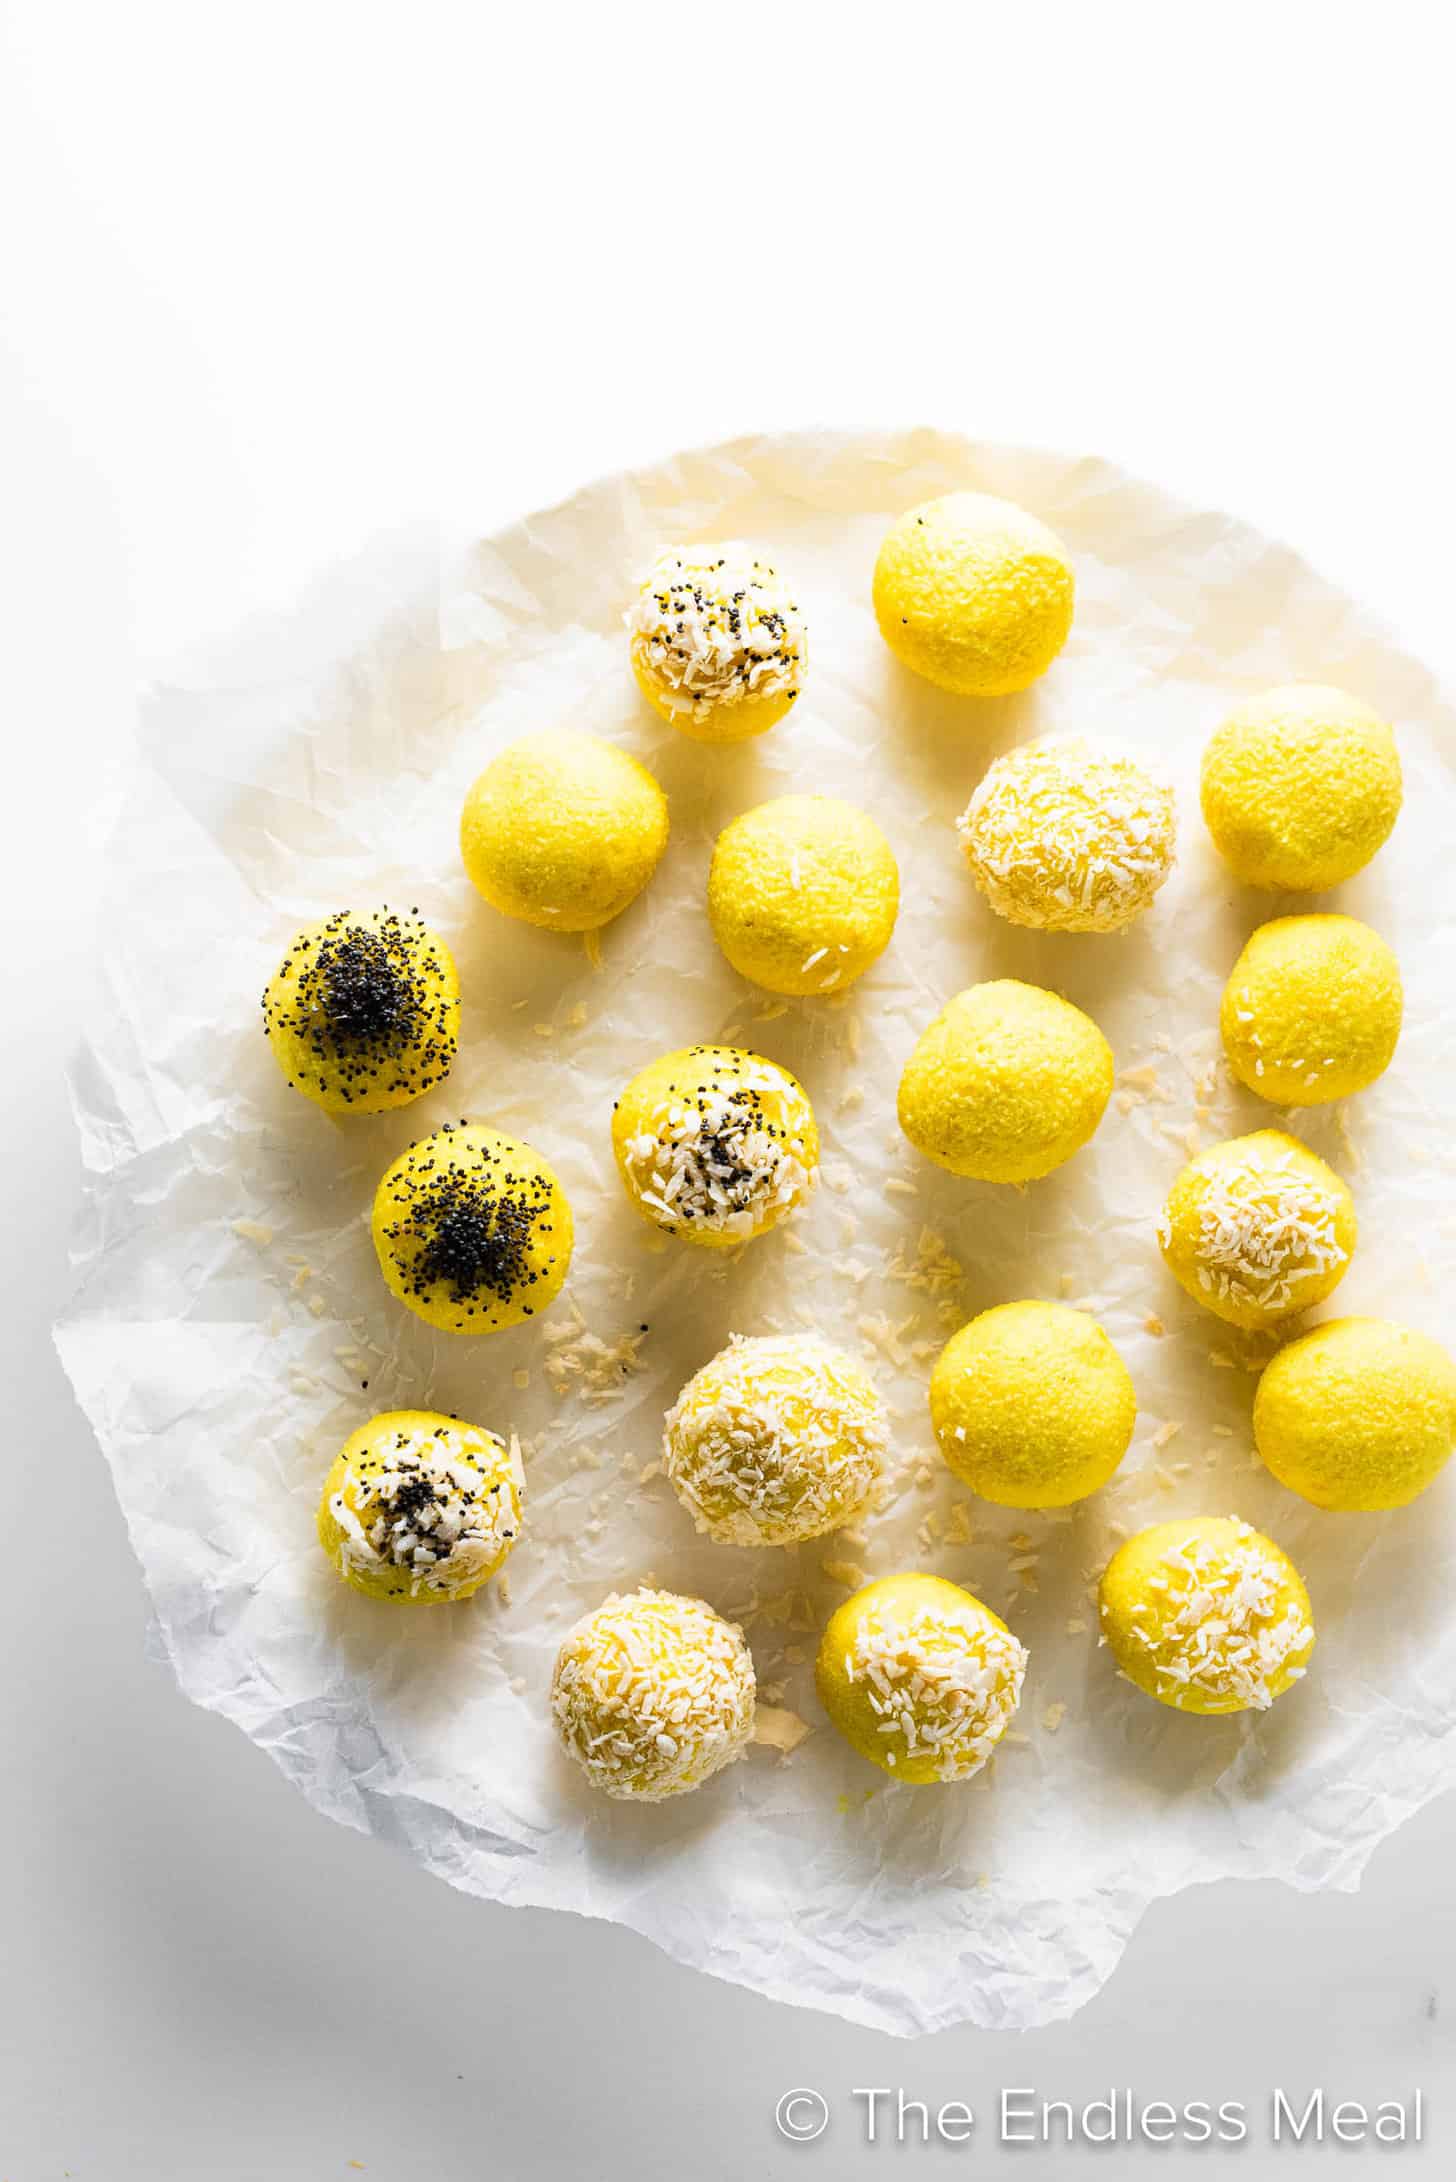 Looking down on a plate of Lemon Balls